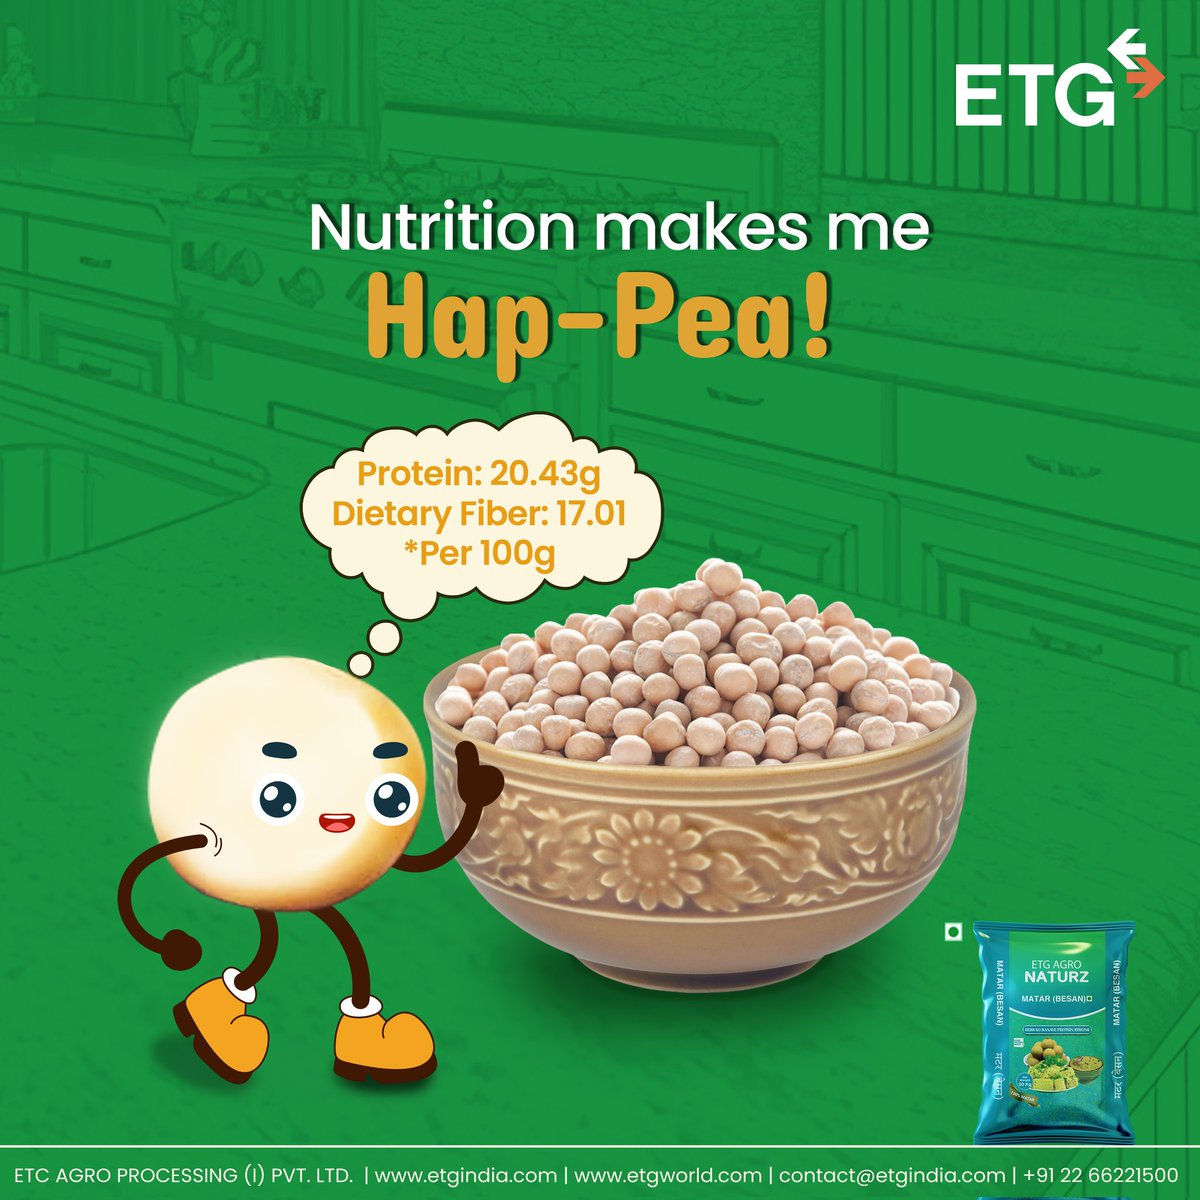 Matar dal or yellow peas is here to ensure you get your daily nutrition right! Every 100g of matar dal contains 20.43g of protein and 17.01g of dietary fiber. So, fuel your body with the goodness of peas cause your health “matars”!

#ETG #ETGIndia #MatarDal #Health #nutrition